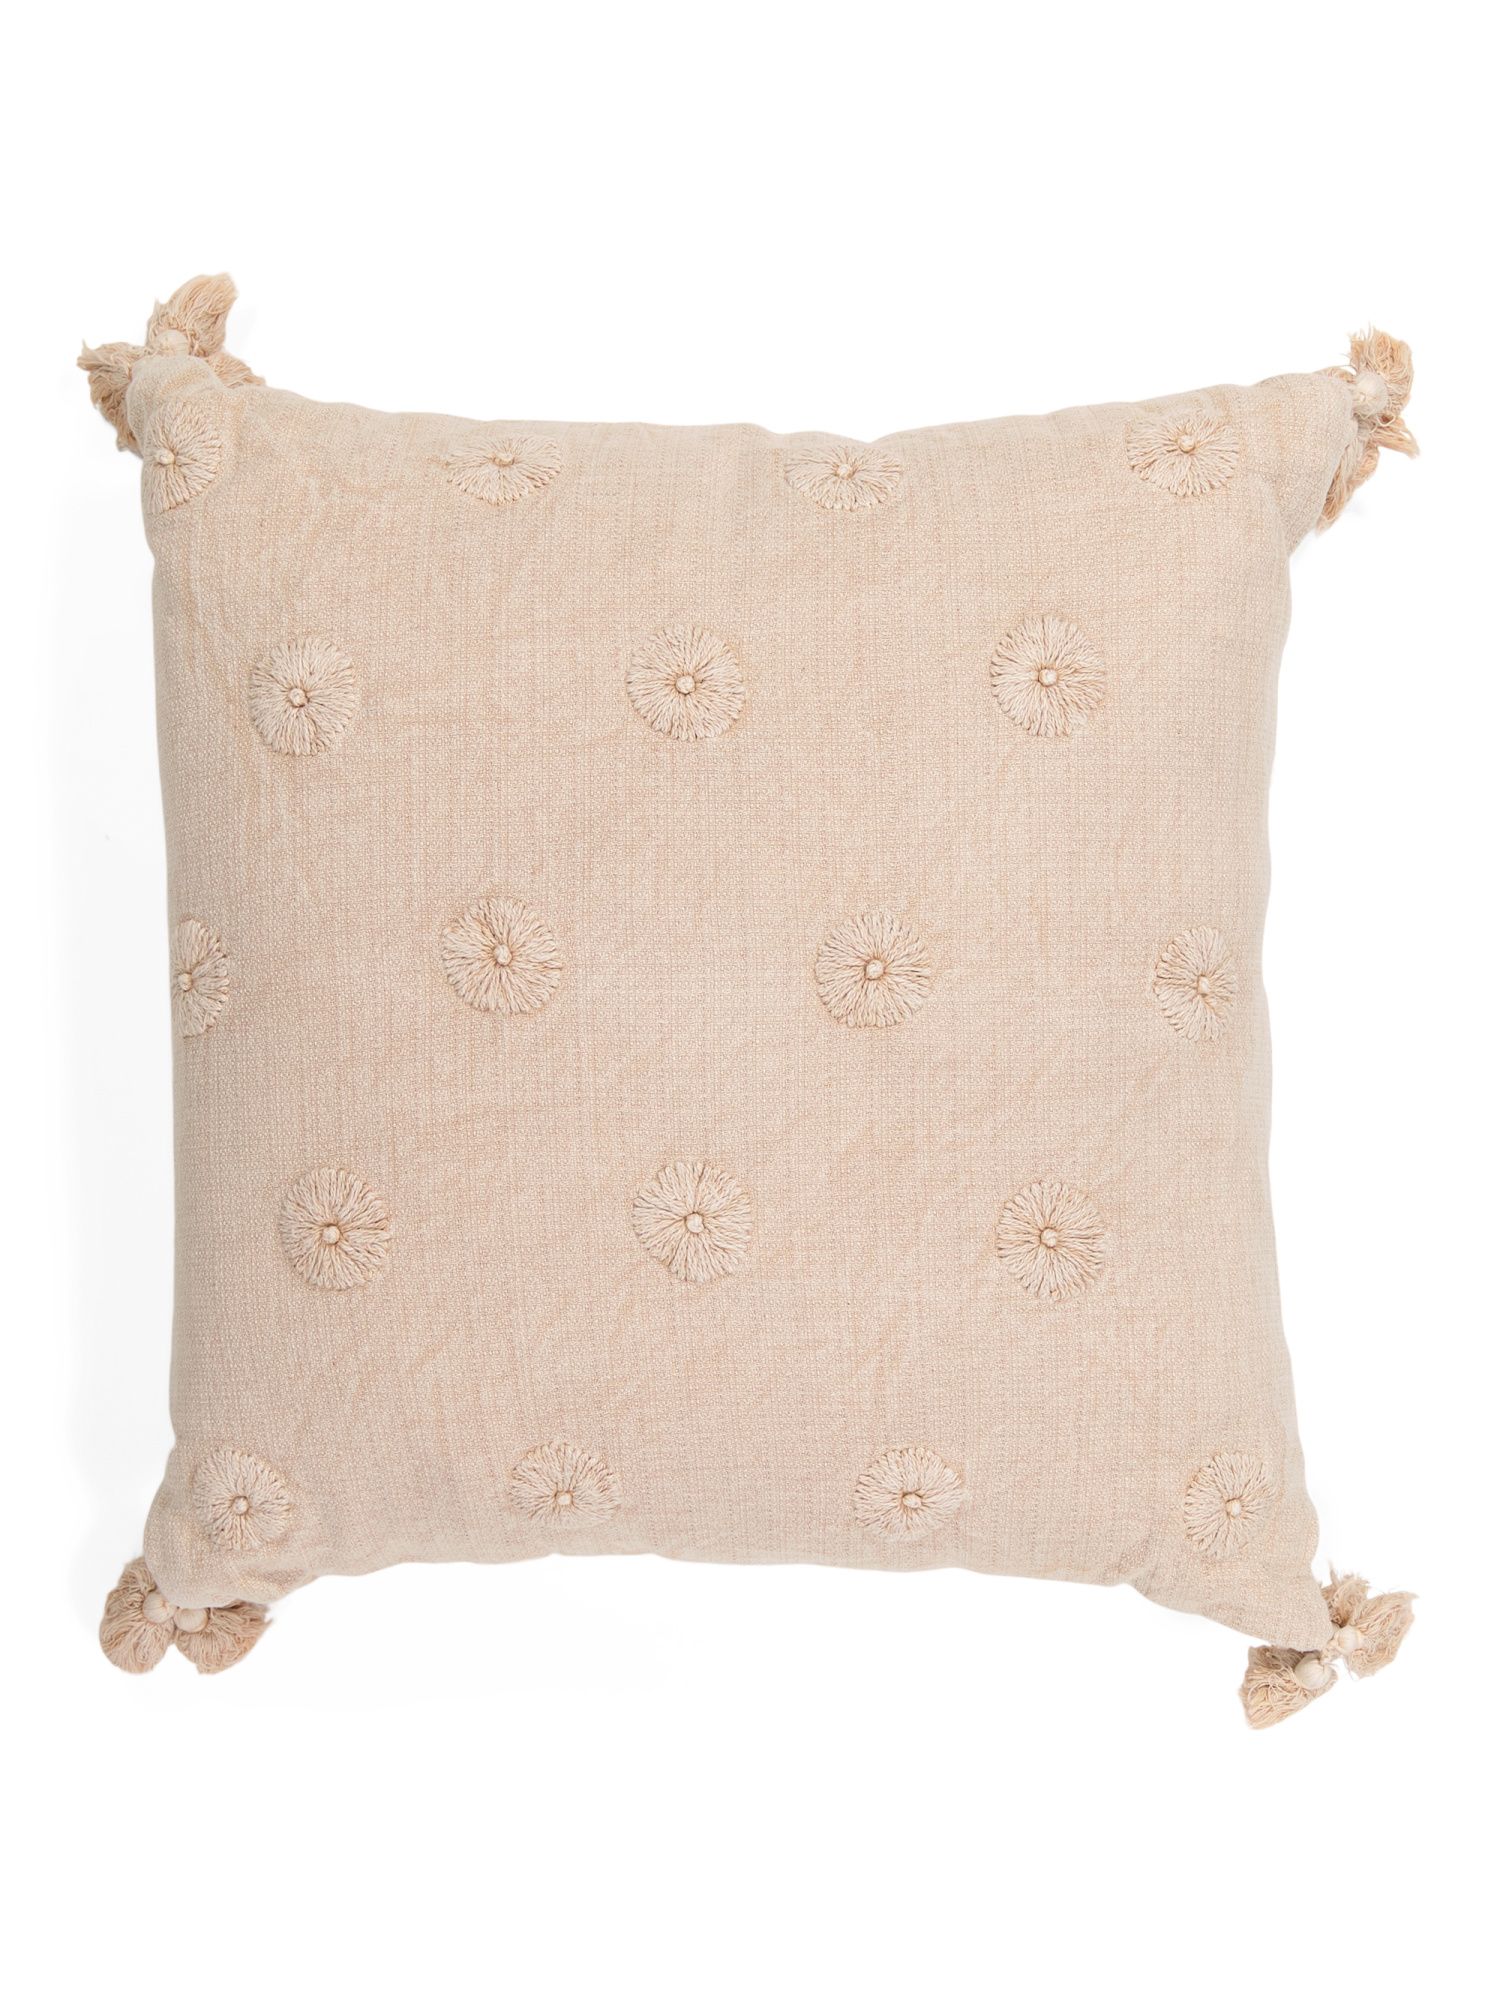 20x20 Hand Knotted Washed Embroidered Pillow | TJ Maxx